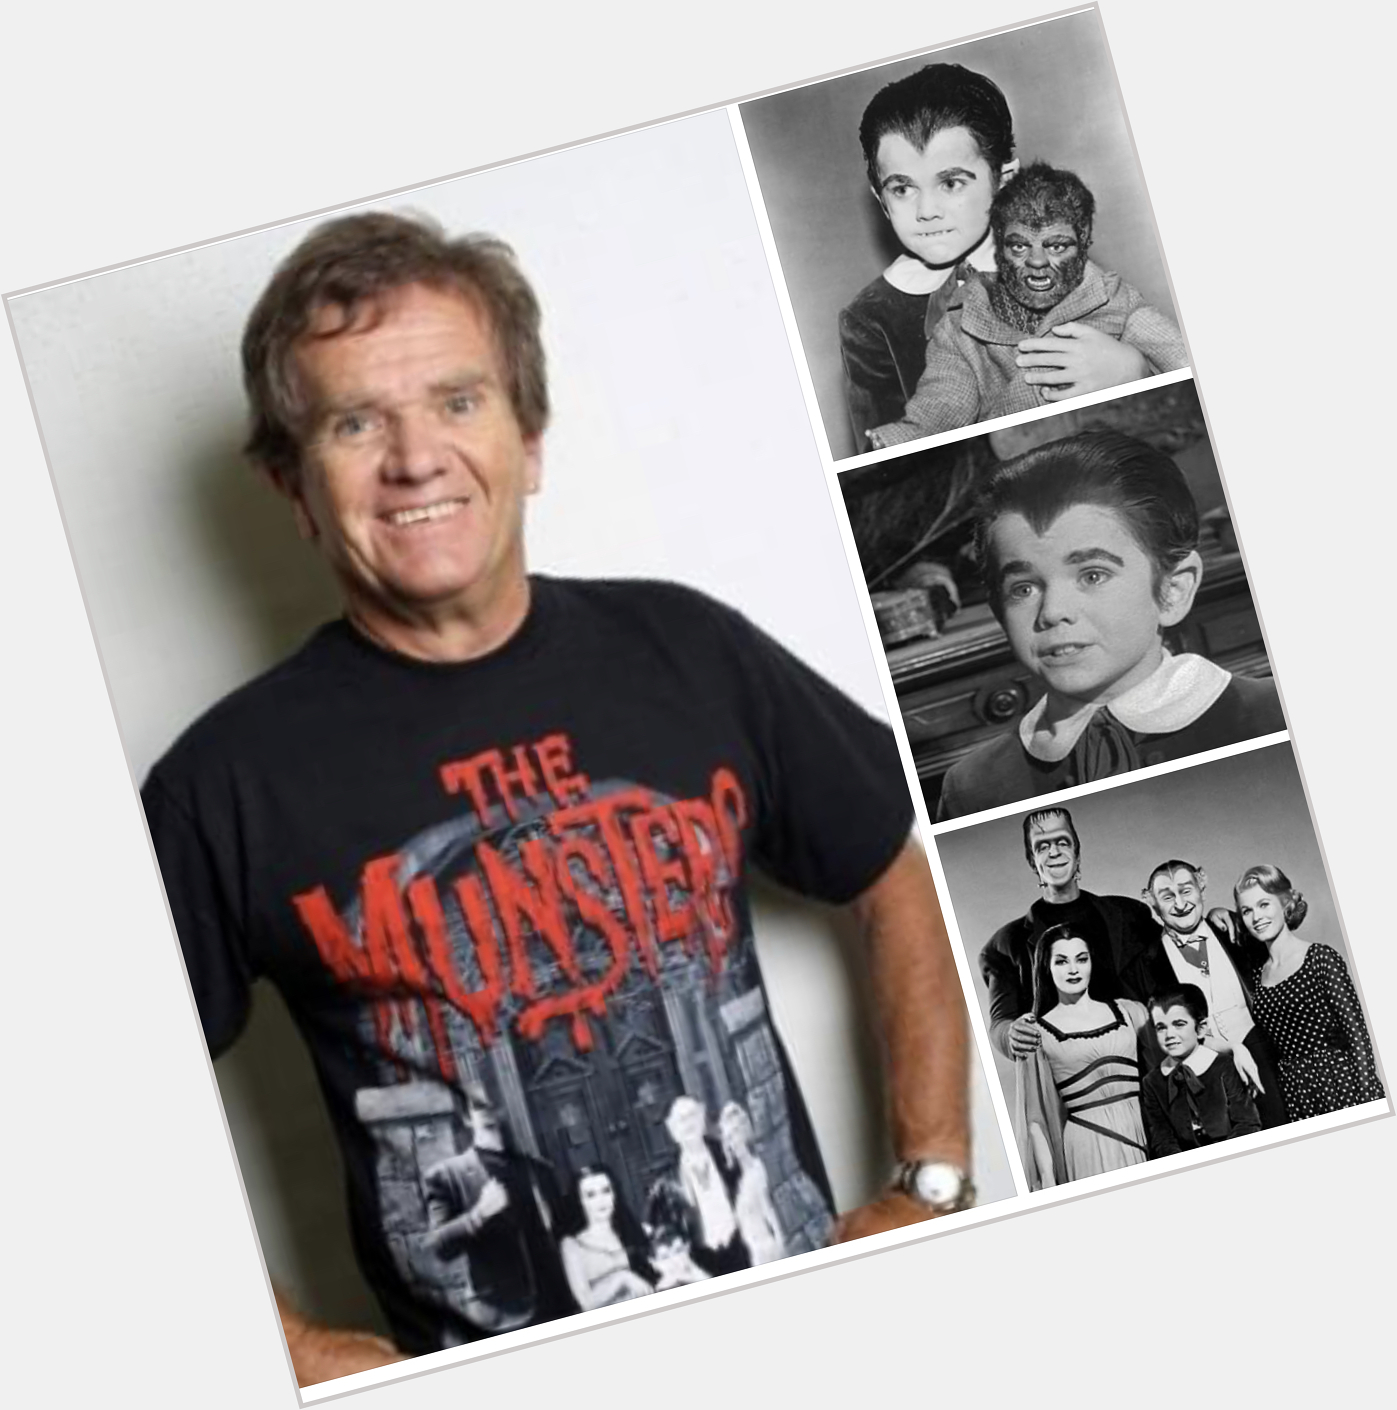 Happy Birthday to Eddie Munster of The Munsters, Butch Patrick. Born on August 2, 1953. 